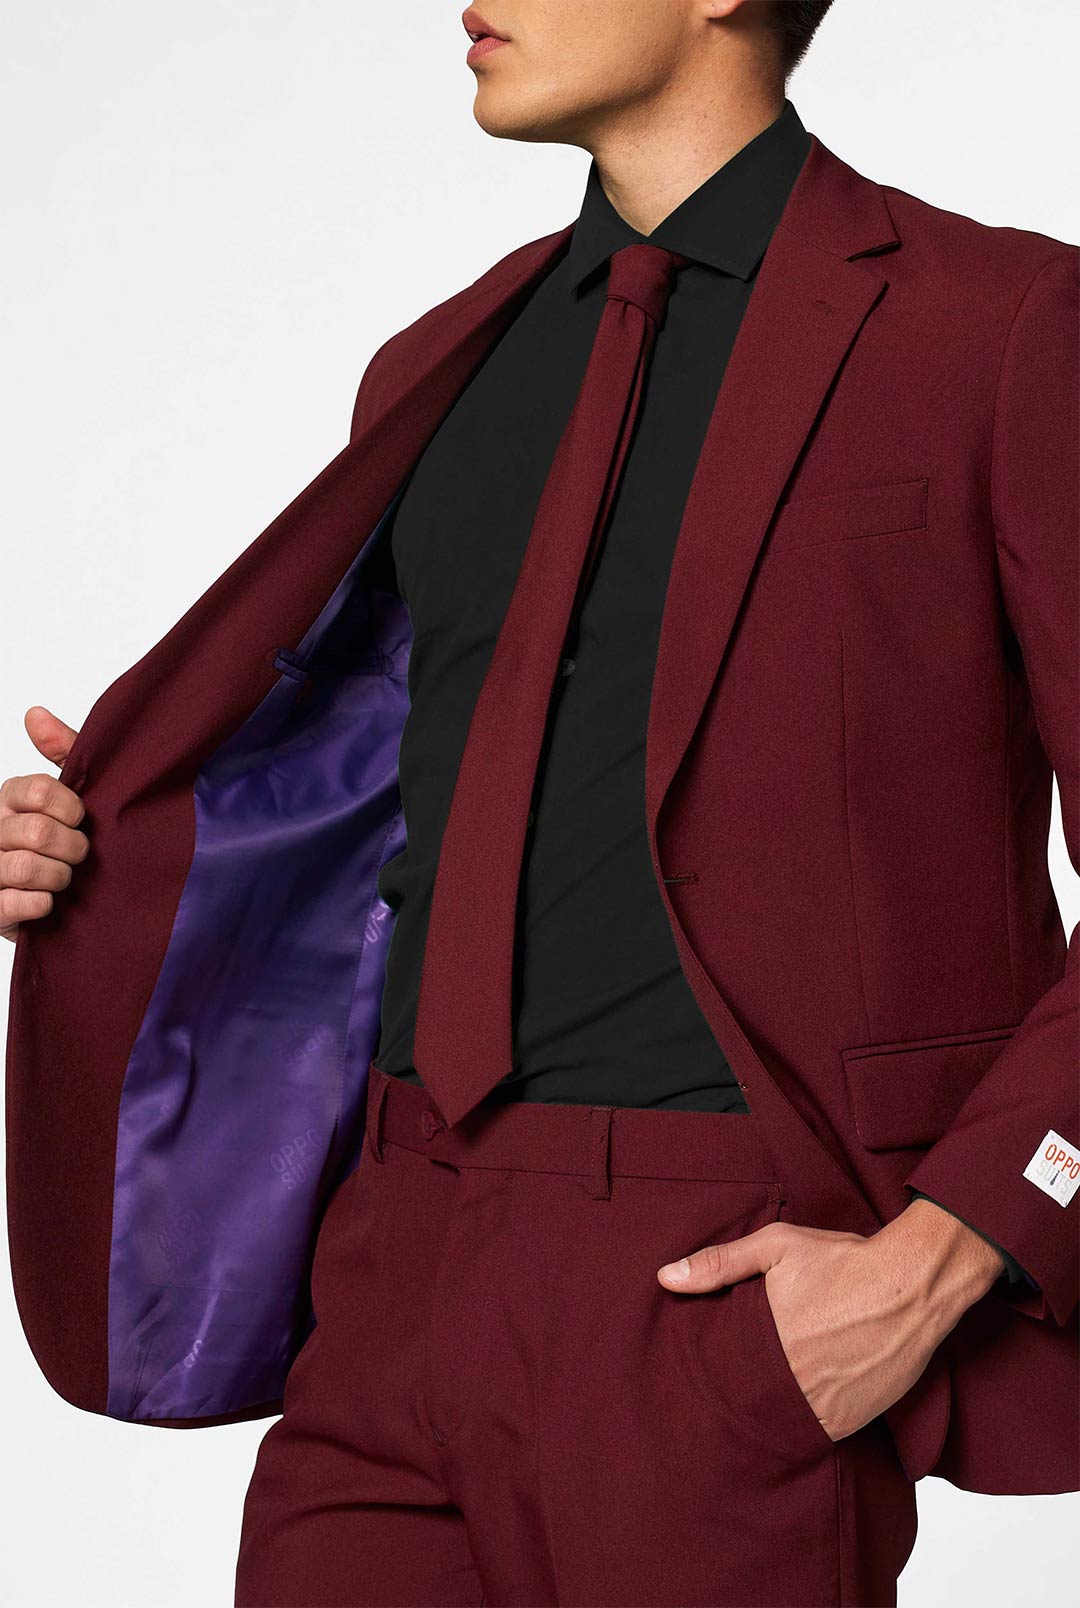 Burgundy 2 Button Suits Starting At $199 - Mensuits.com